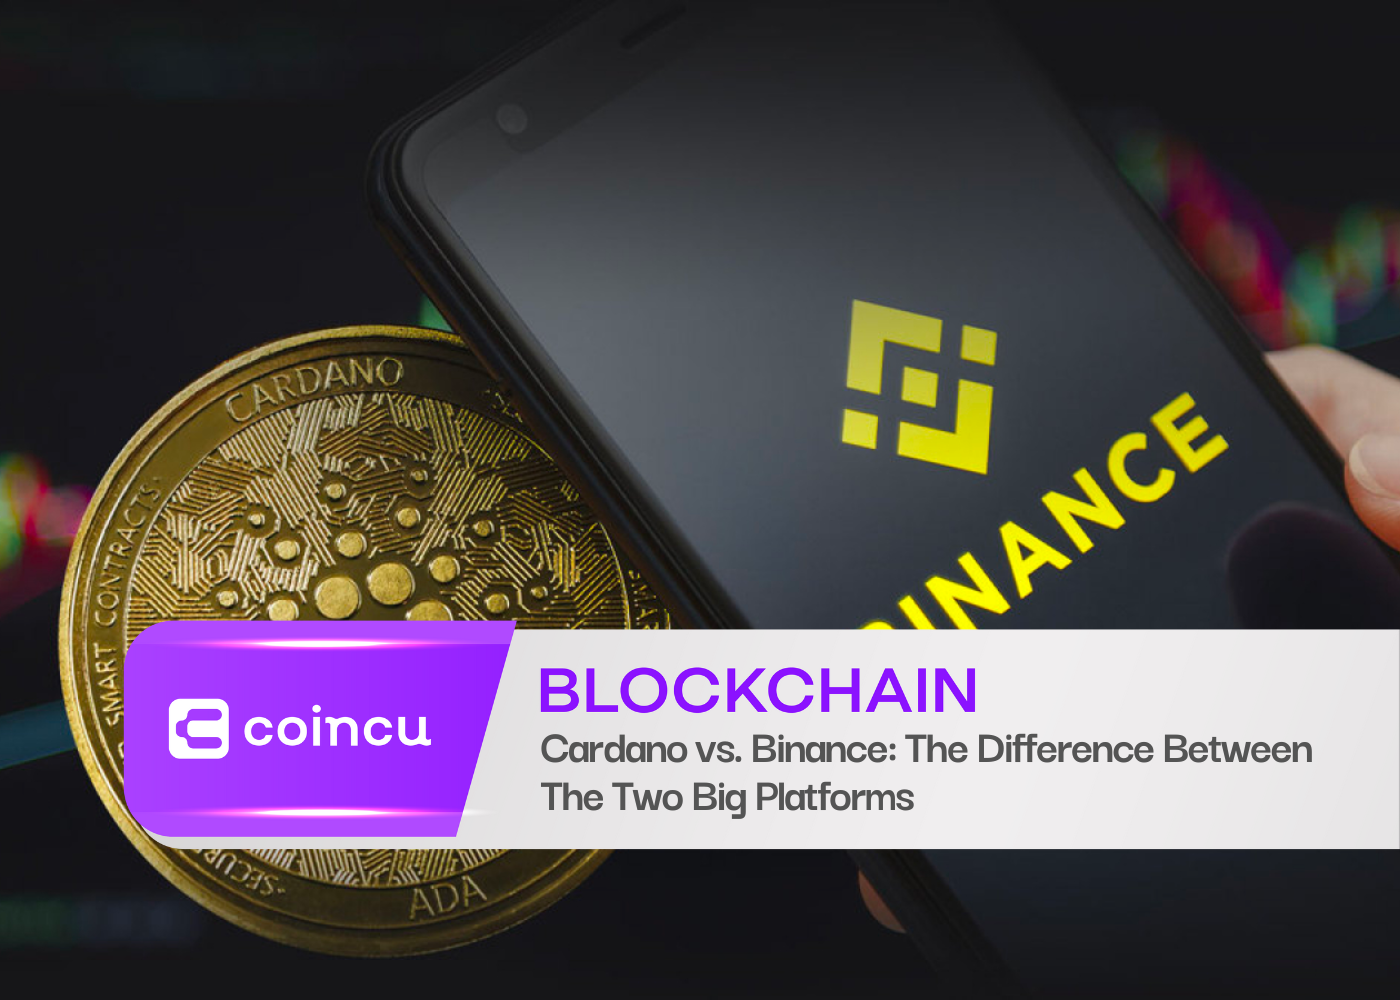 Cardano vs. Binance: The Difference Between The Two Big Platforms